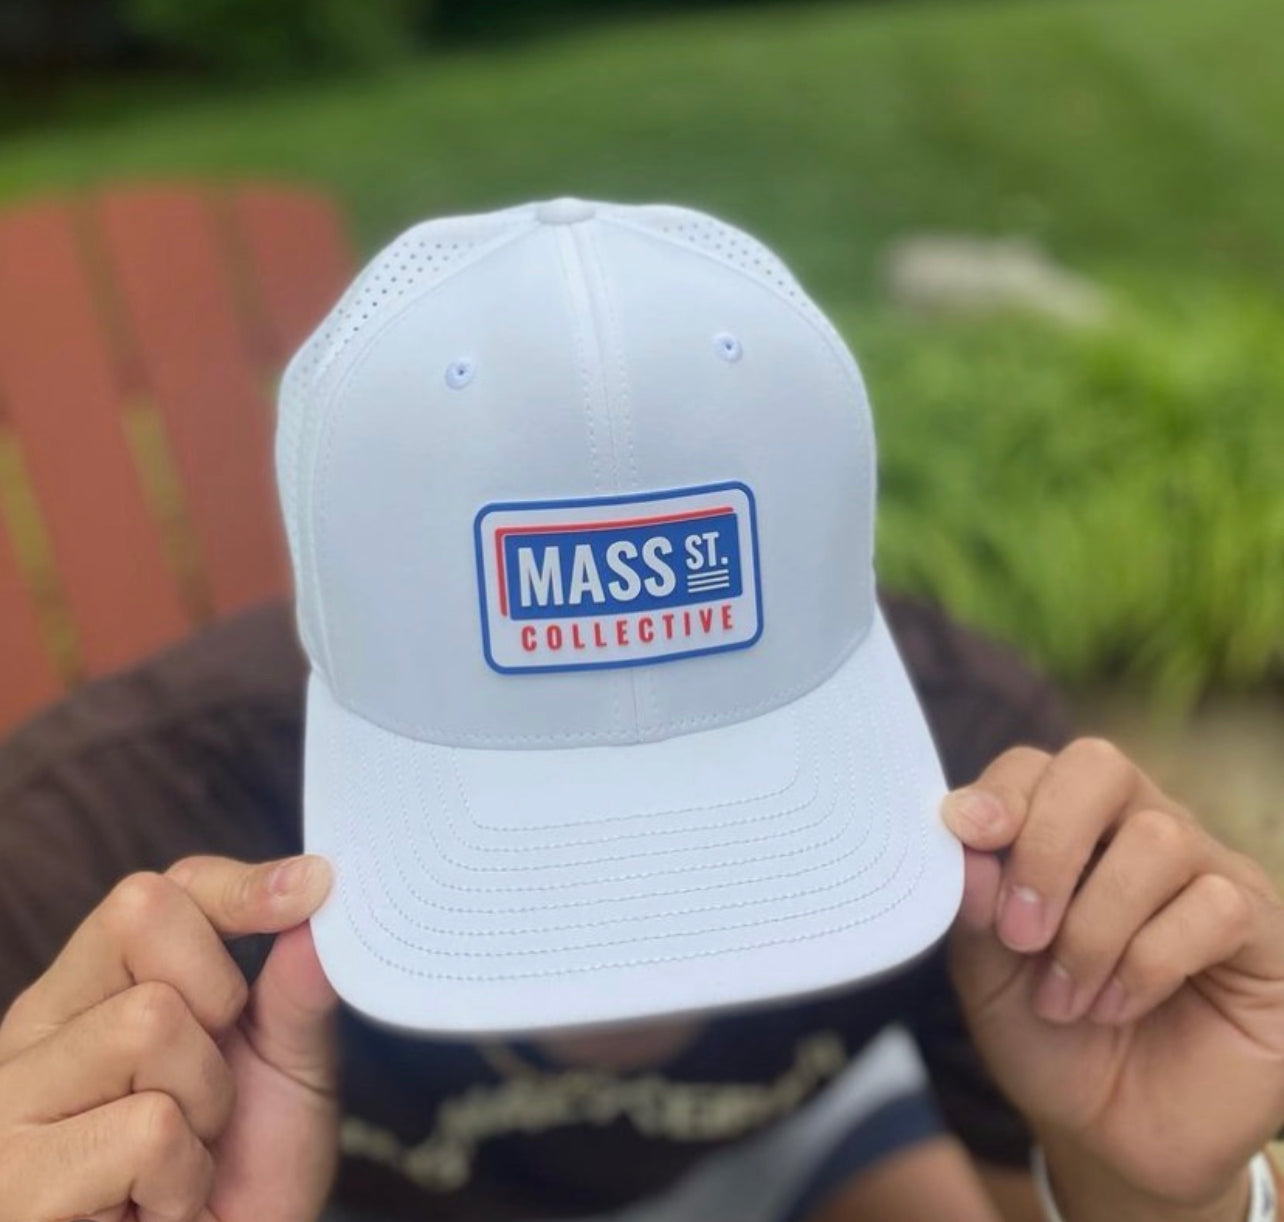 Mass St. Collective Elite Classic Hat